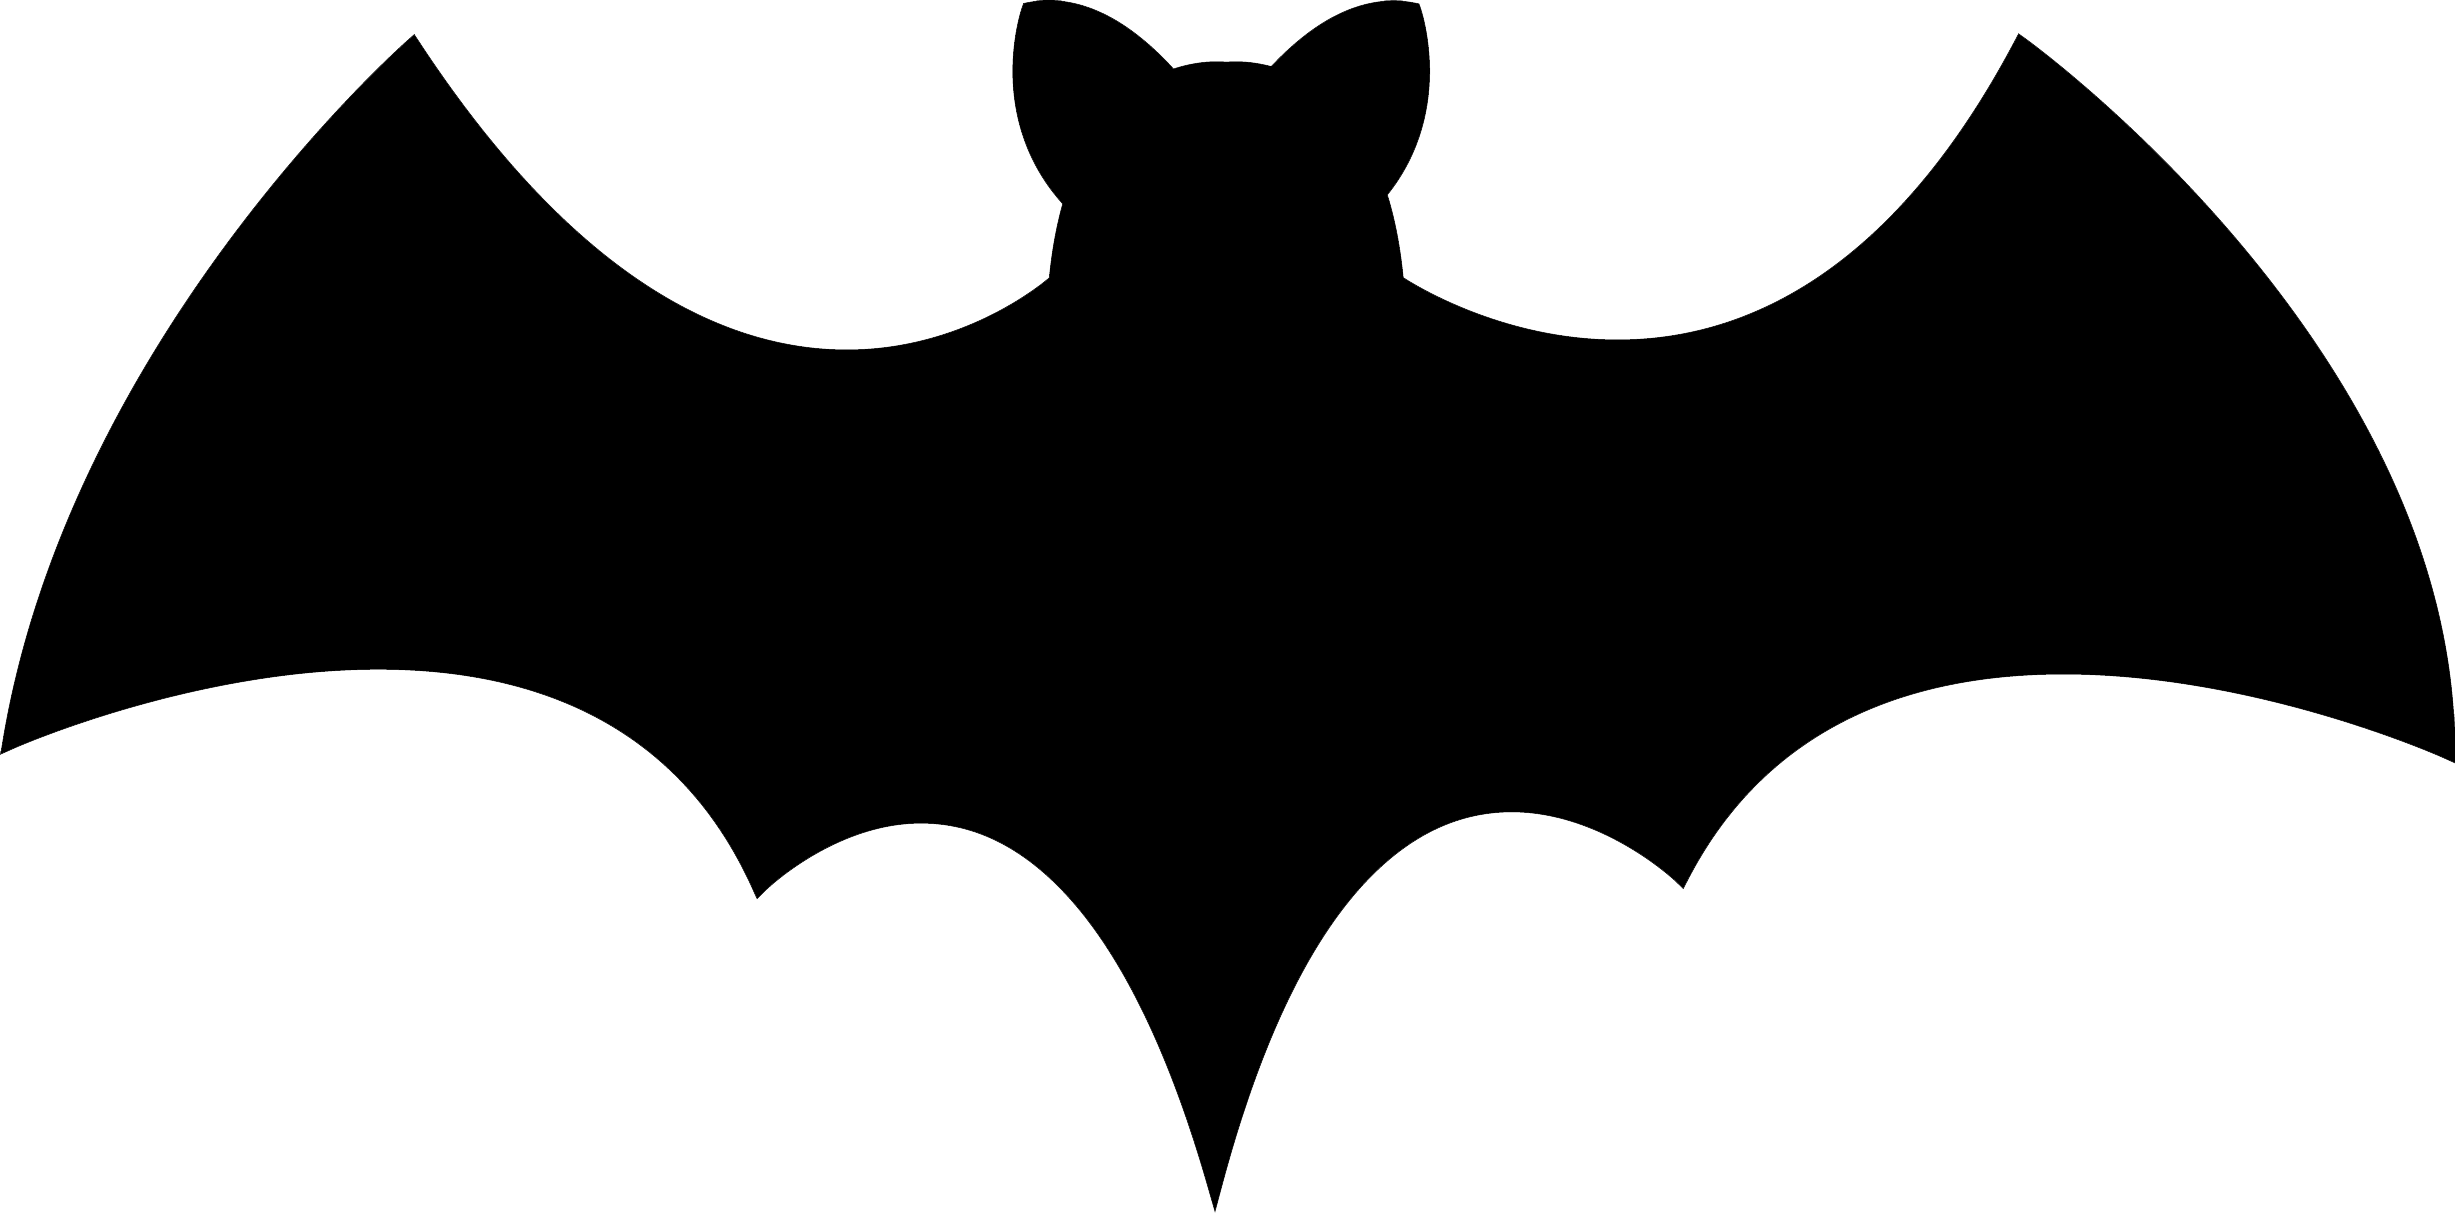 Bat Silhouette Images for Logo - Bat silhouette vector free stock pumpkin - RR collections